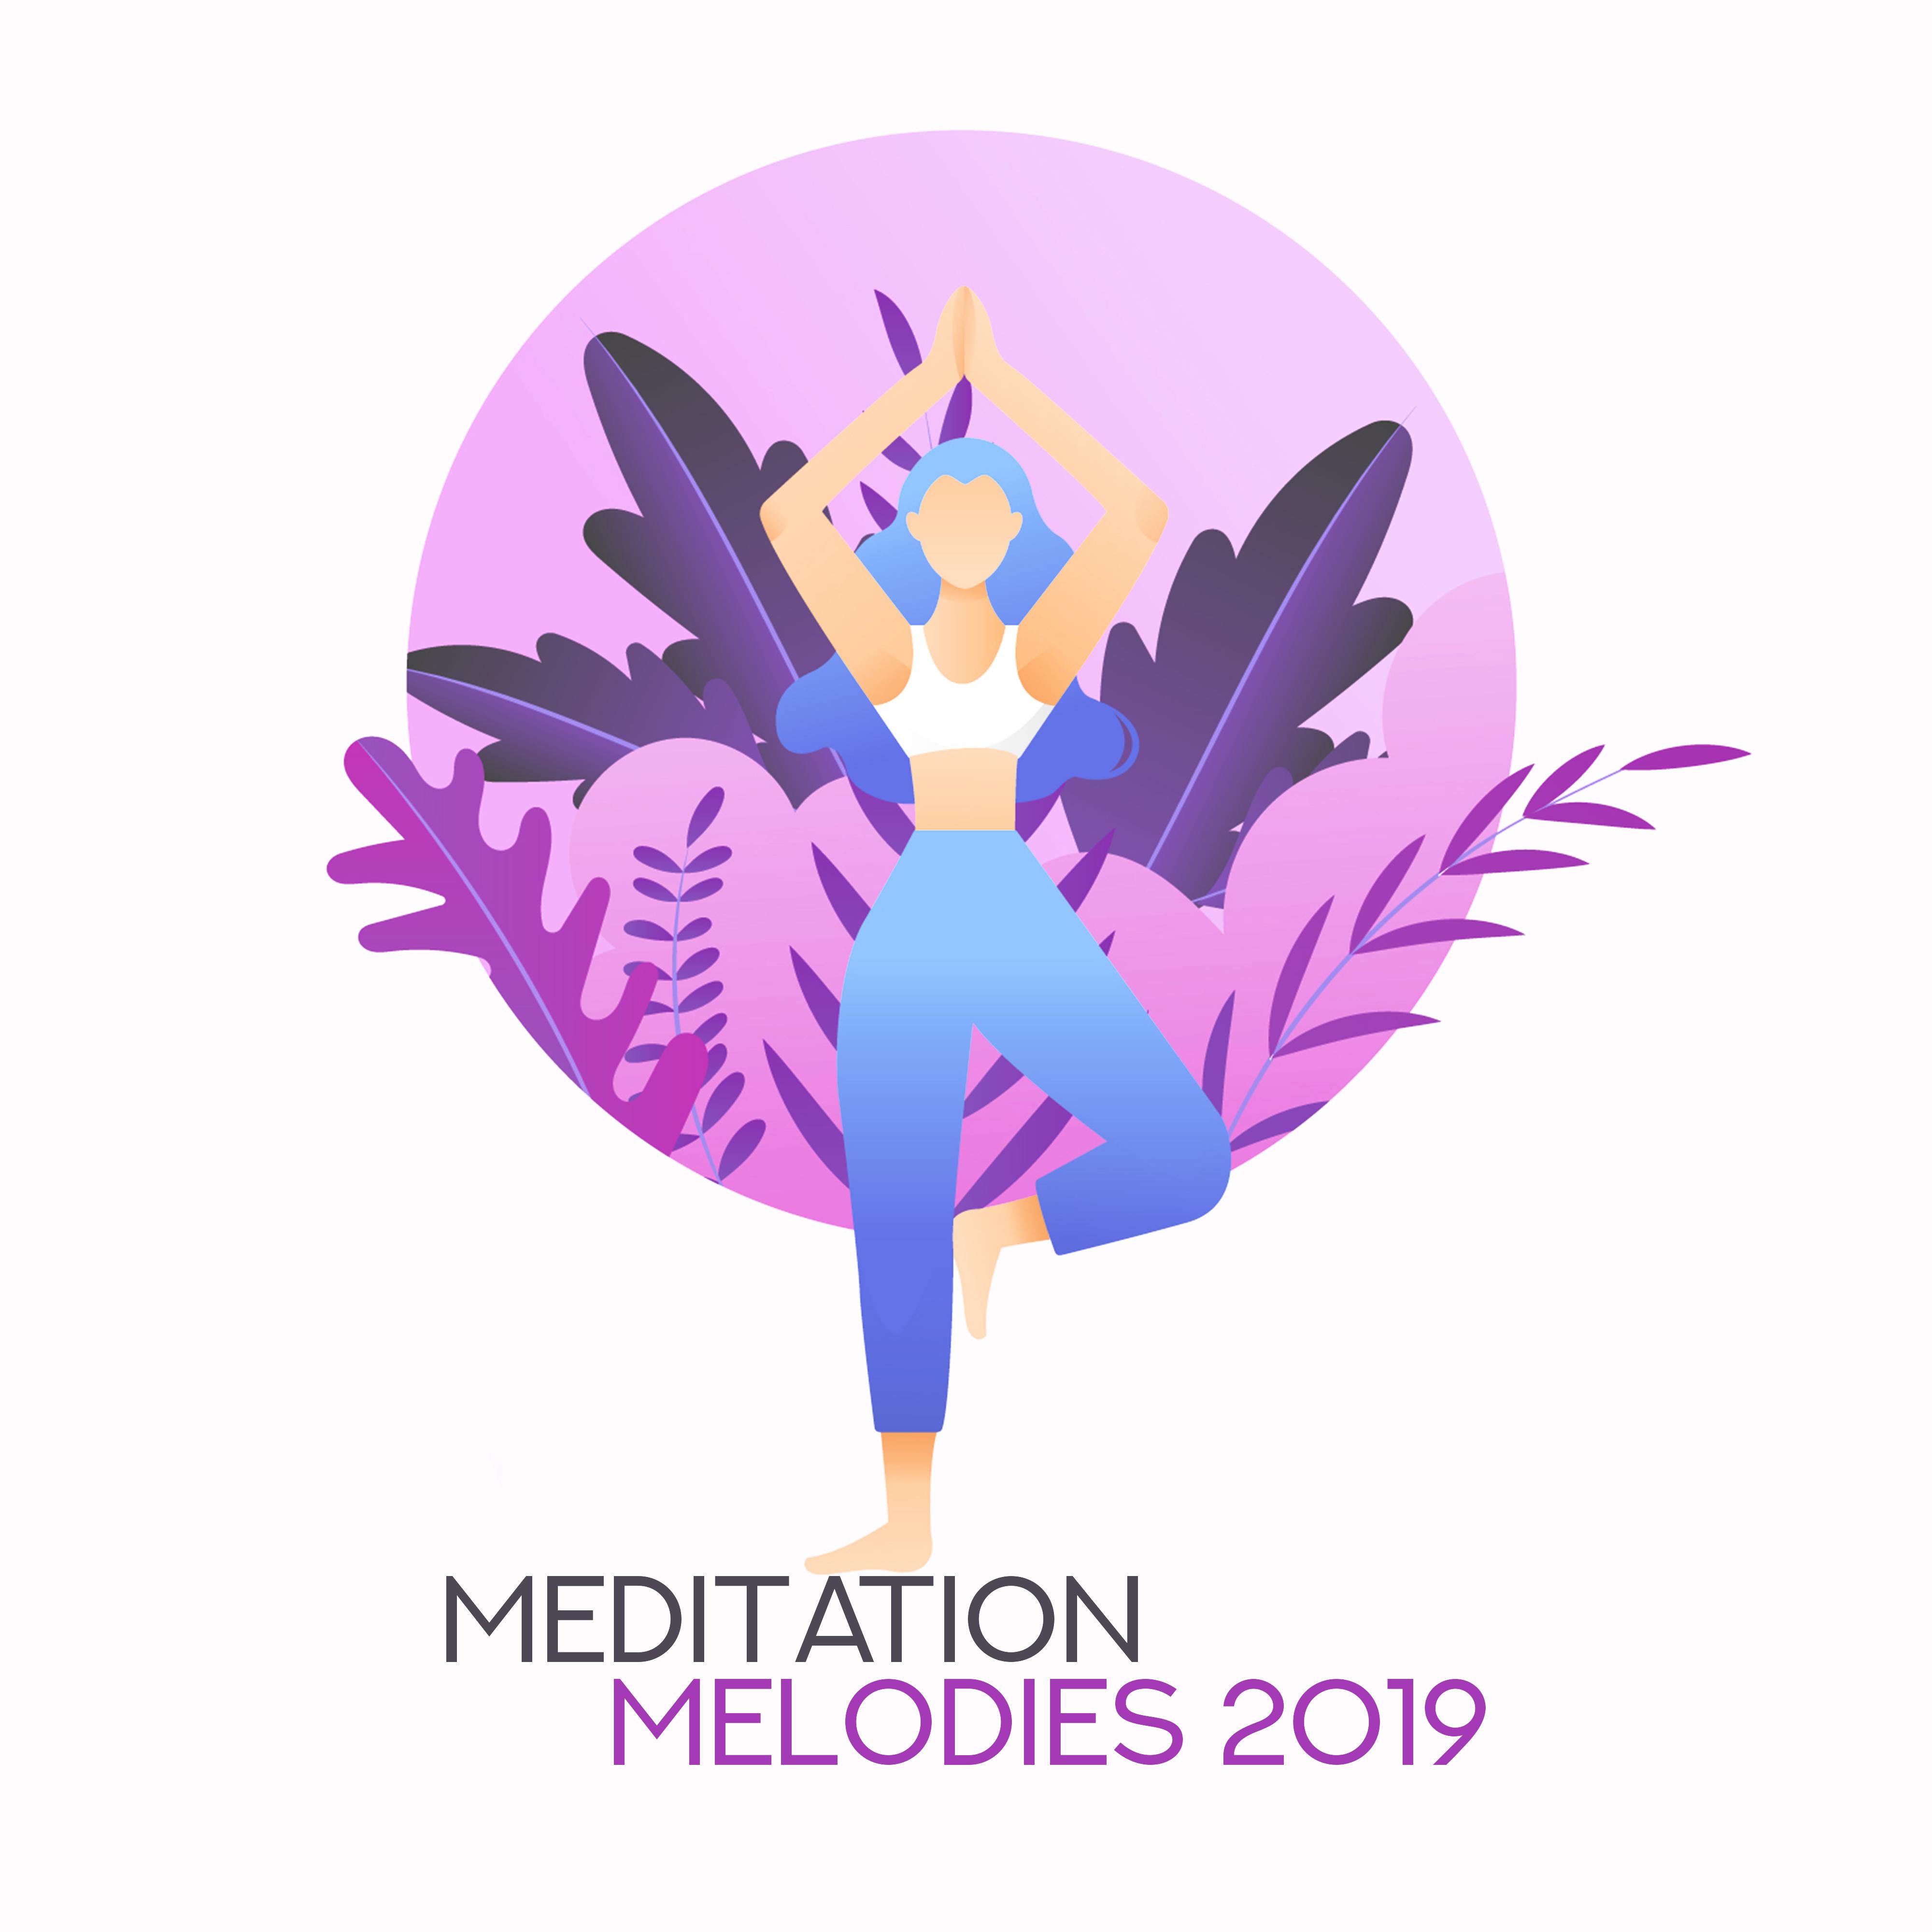 Meditation Melodies 2019: Compilation of New Age Fresh Music, Ambient Instrumental Background for Yoga Training & Deep Relaxation